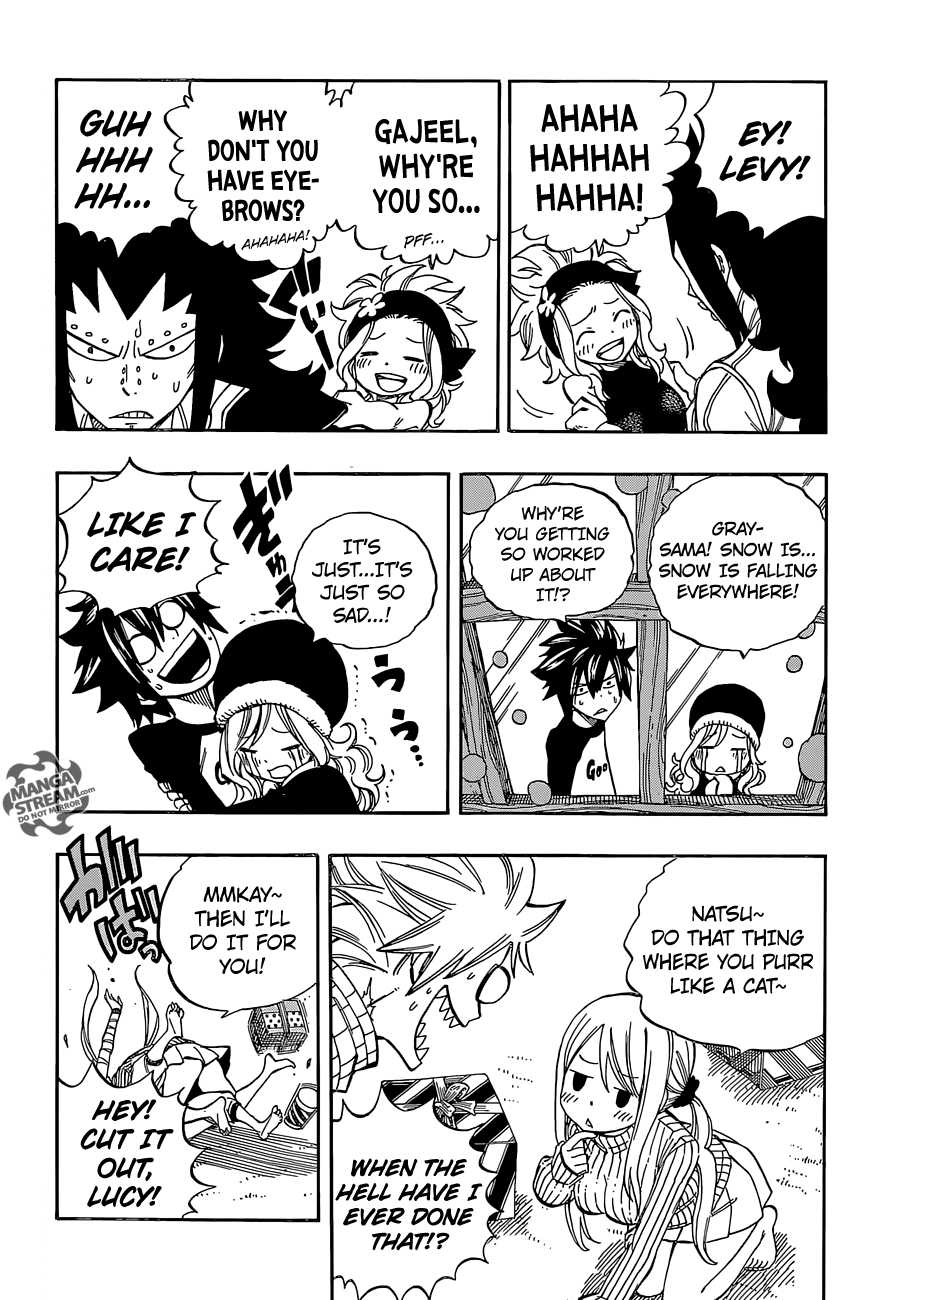 Fairy Tail Special Chapter